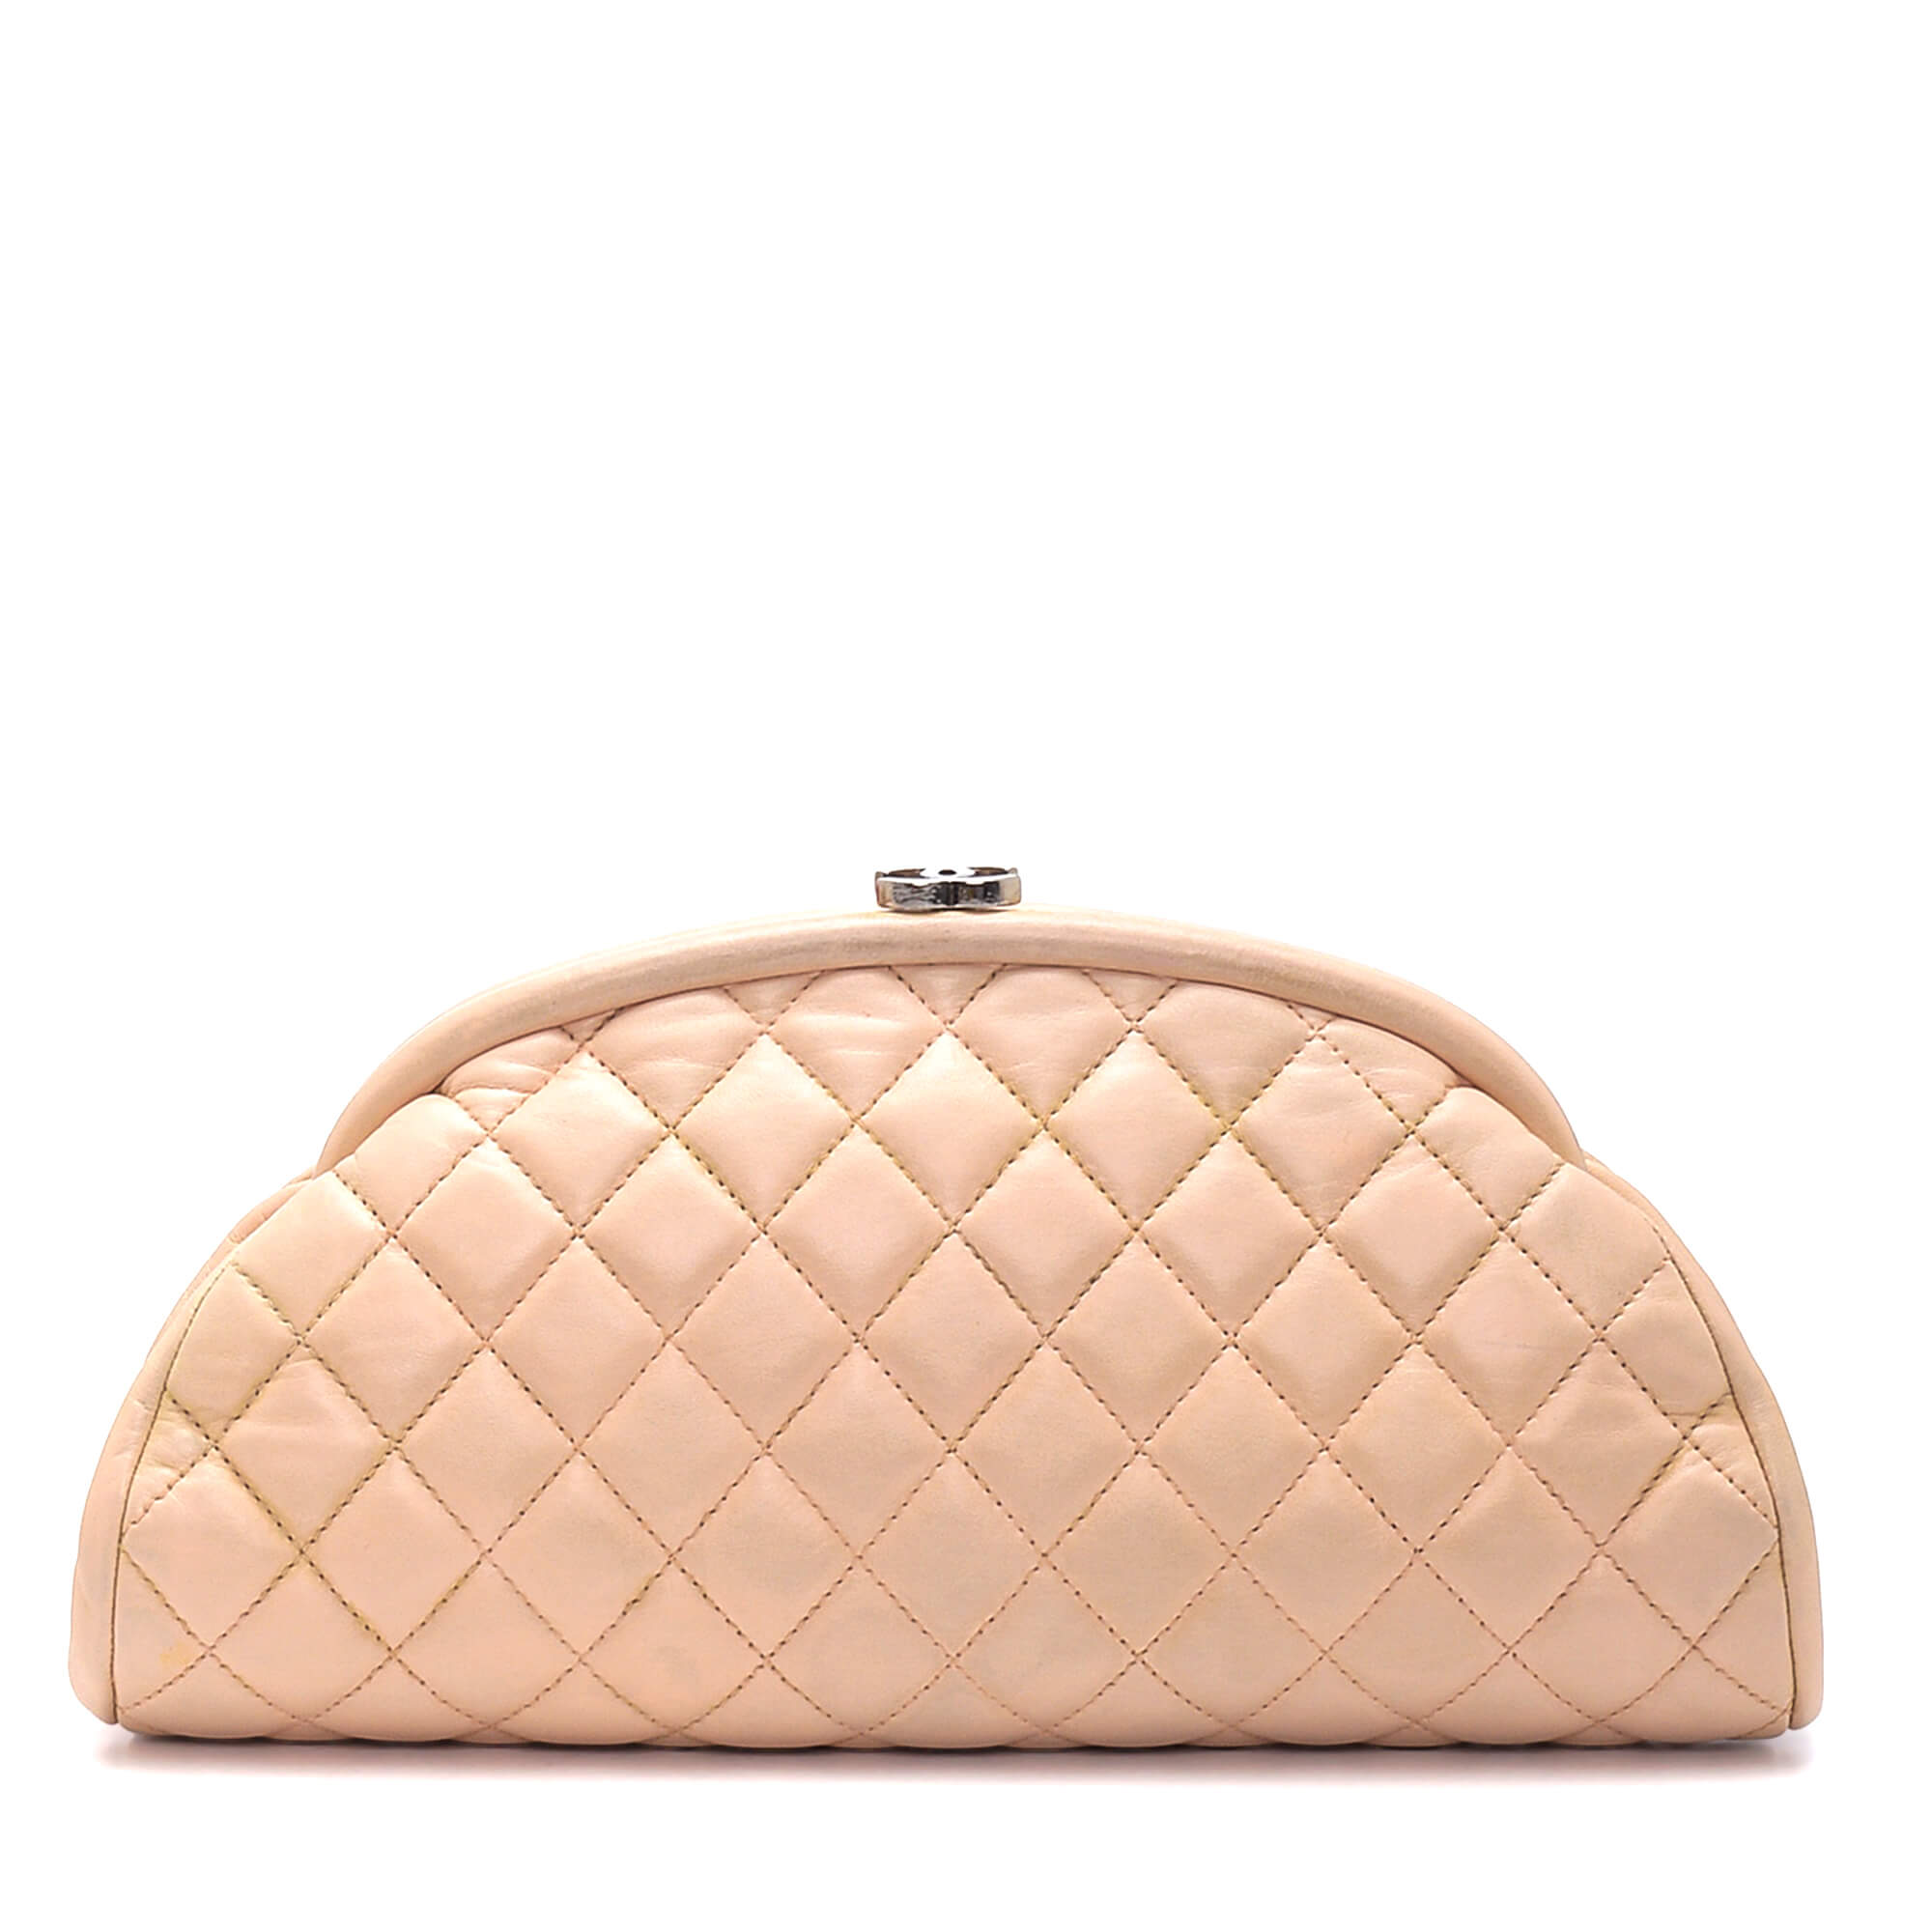 Chanel - Ivory Quilted Lambskin Leather Timeless CC Clutch